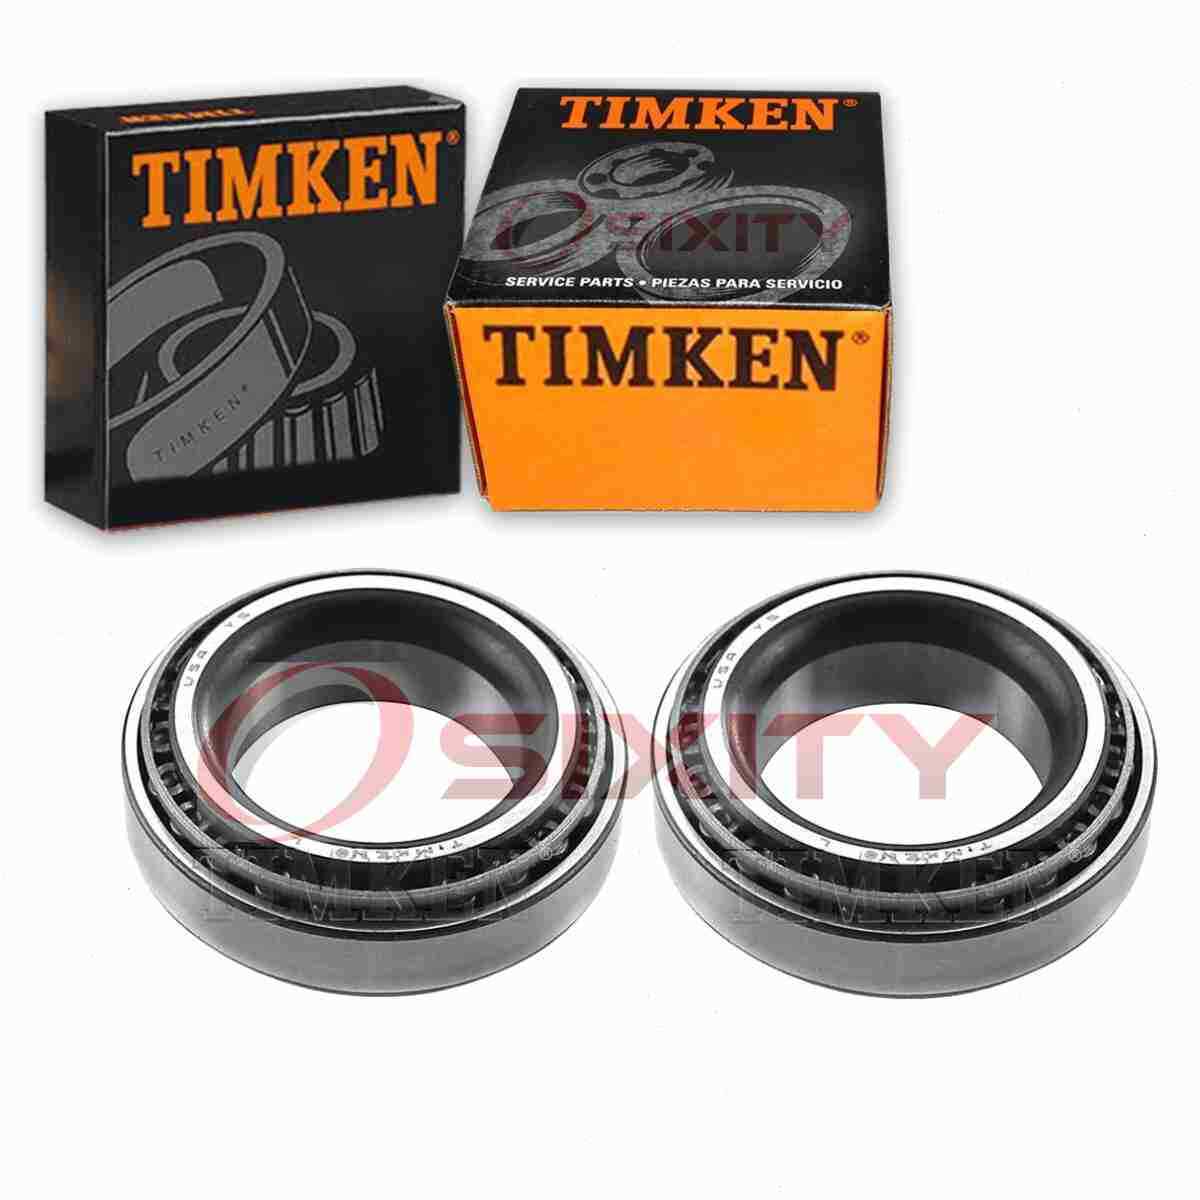 2 pc Timken Front Inner Wheel Bearing and Race Sets for 1973-1989 Plymouth ut